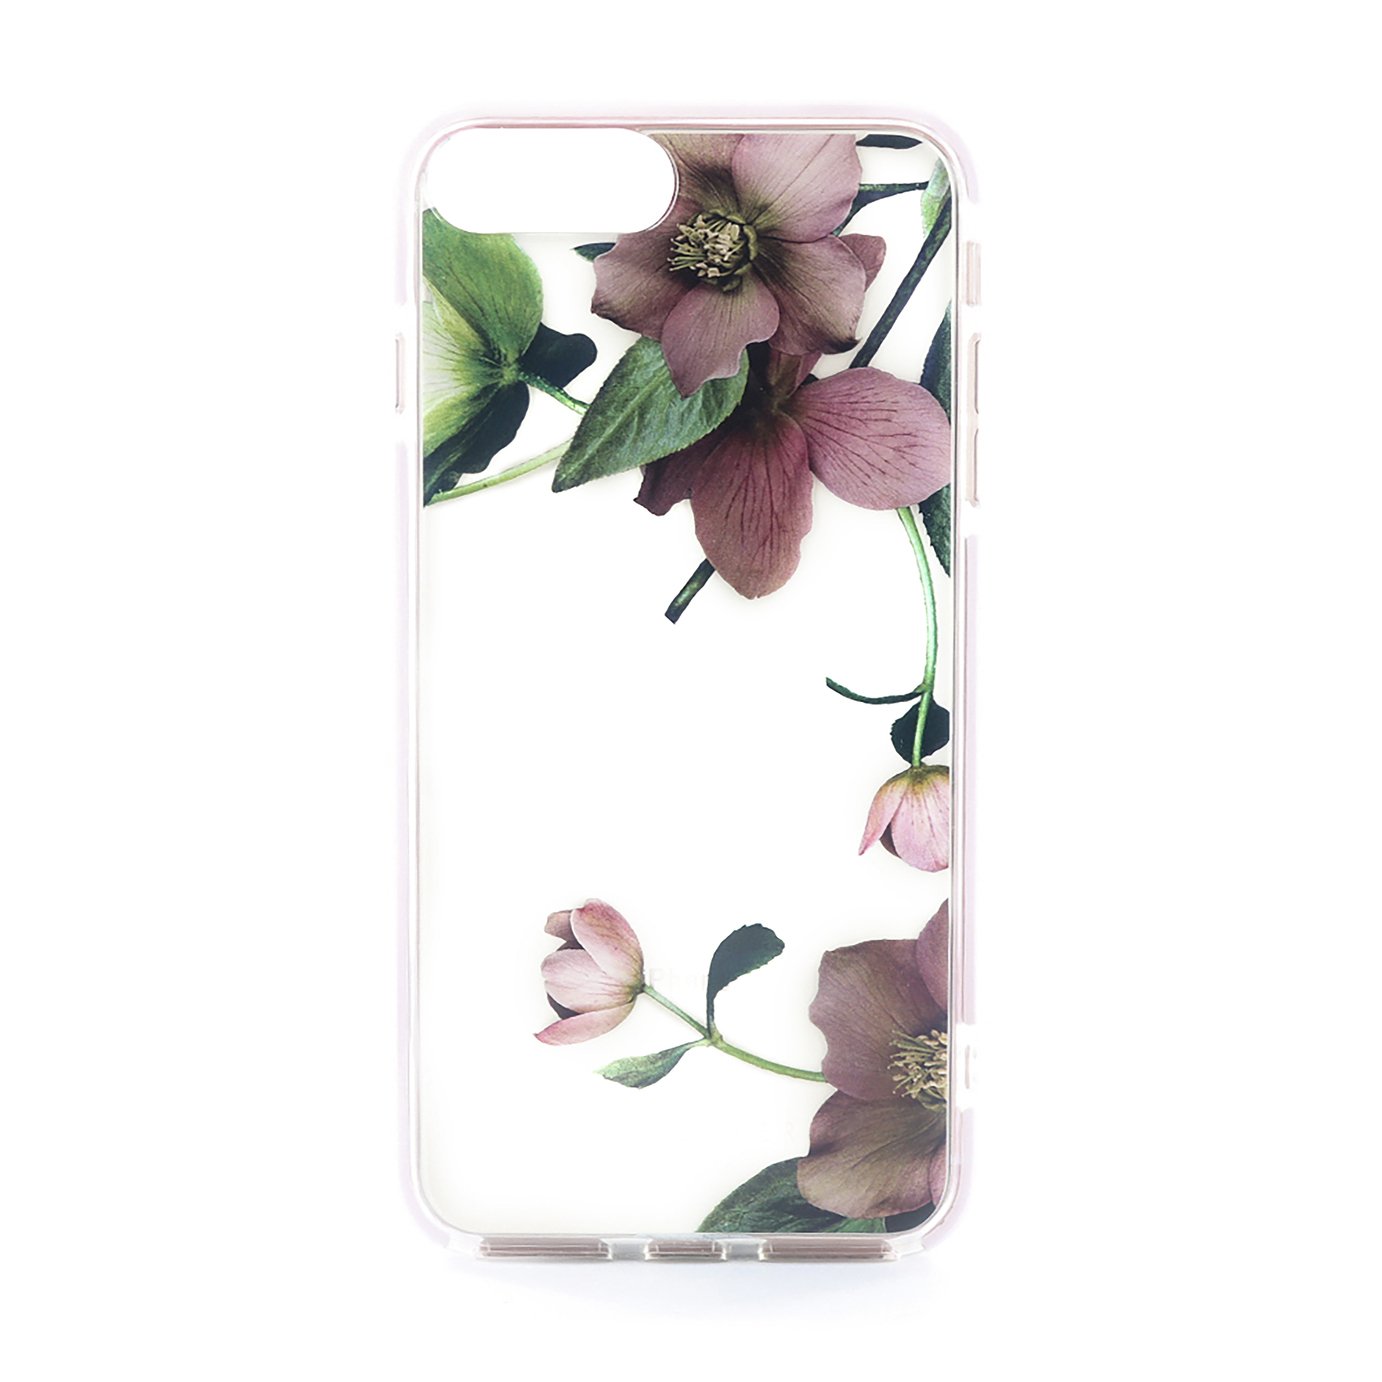 Ted Baker iPhone 6/7/8 Plus Phone Case Review